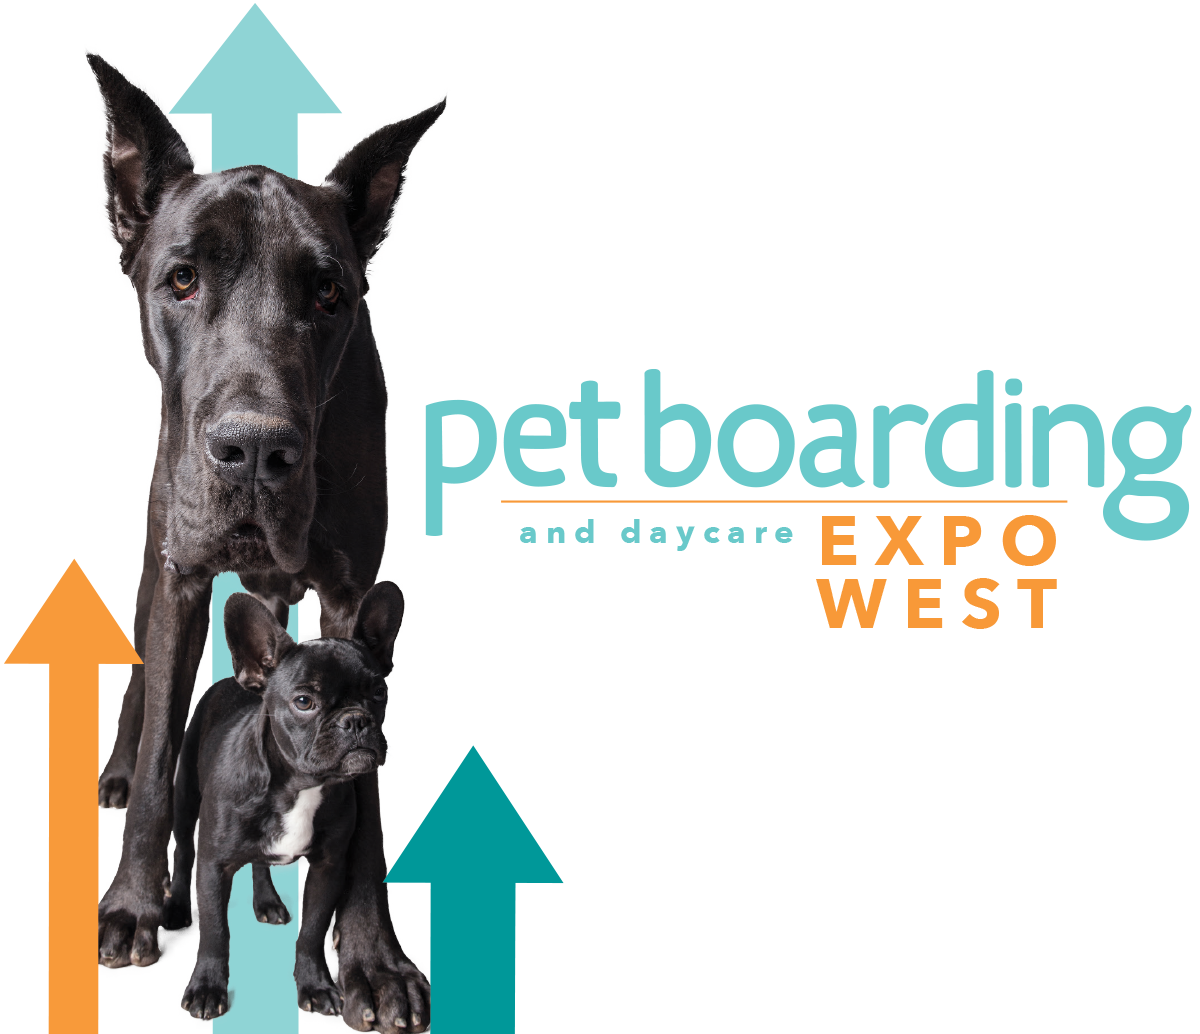 A large dogs standing over a small dogs with blue and orange arrows pointing up behind them; text that reads pet boarding and daycare expo west